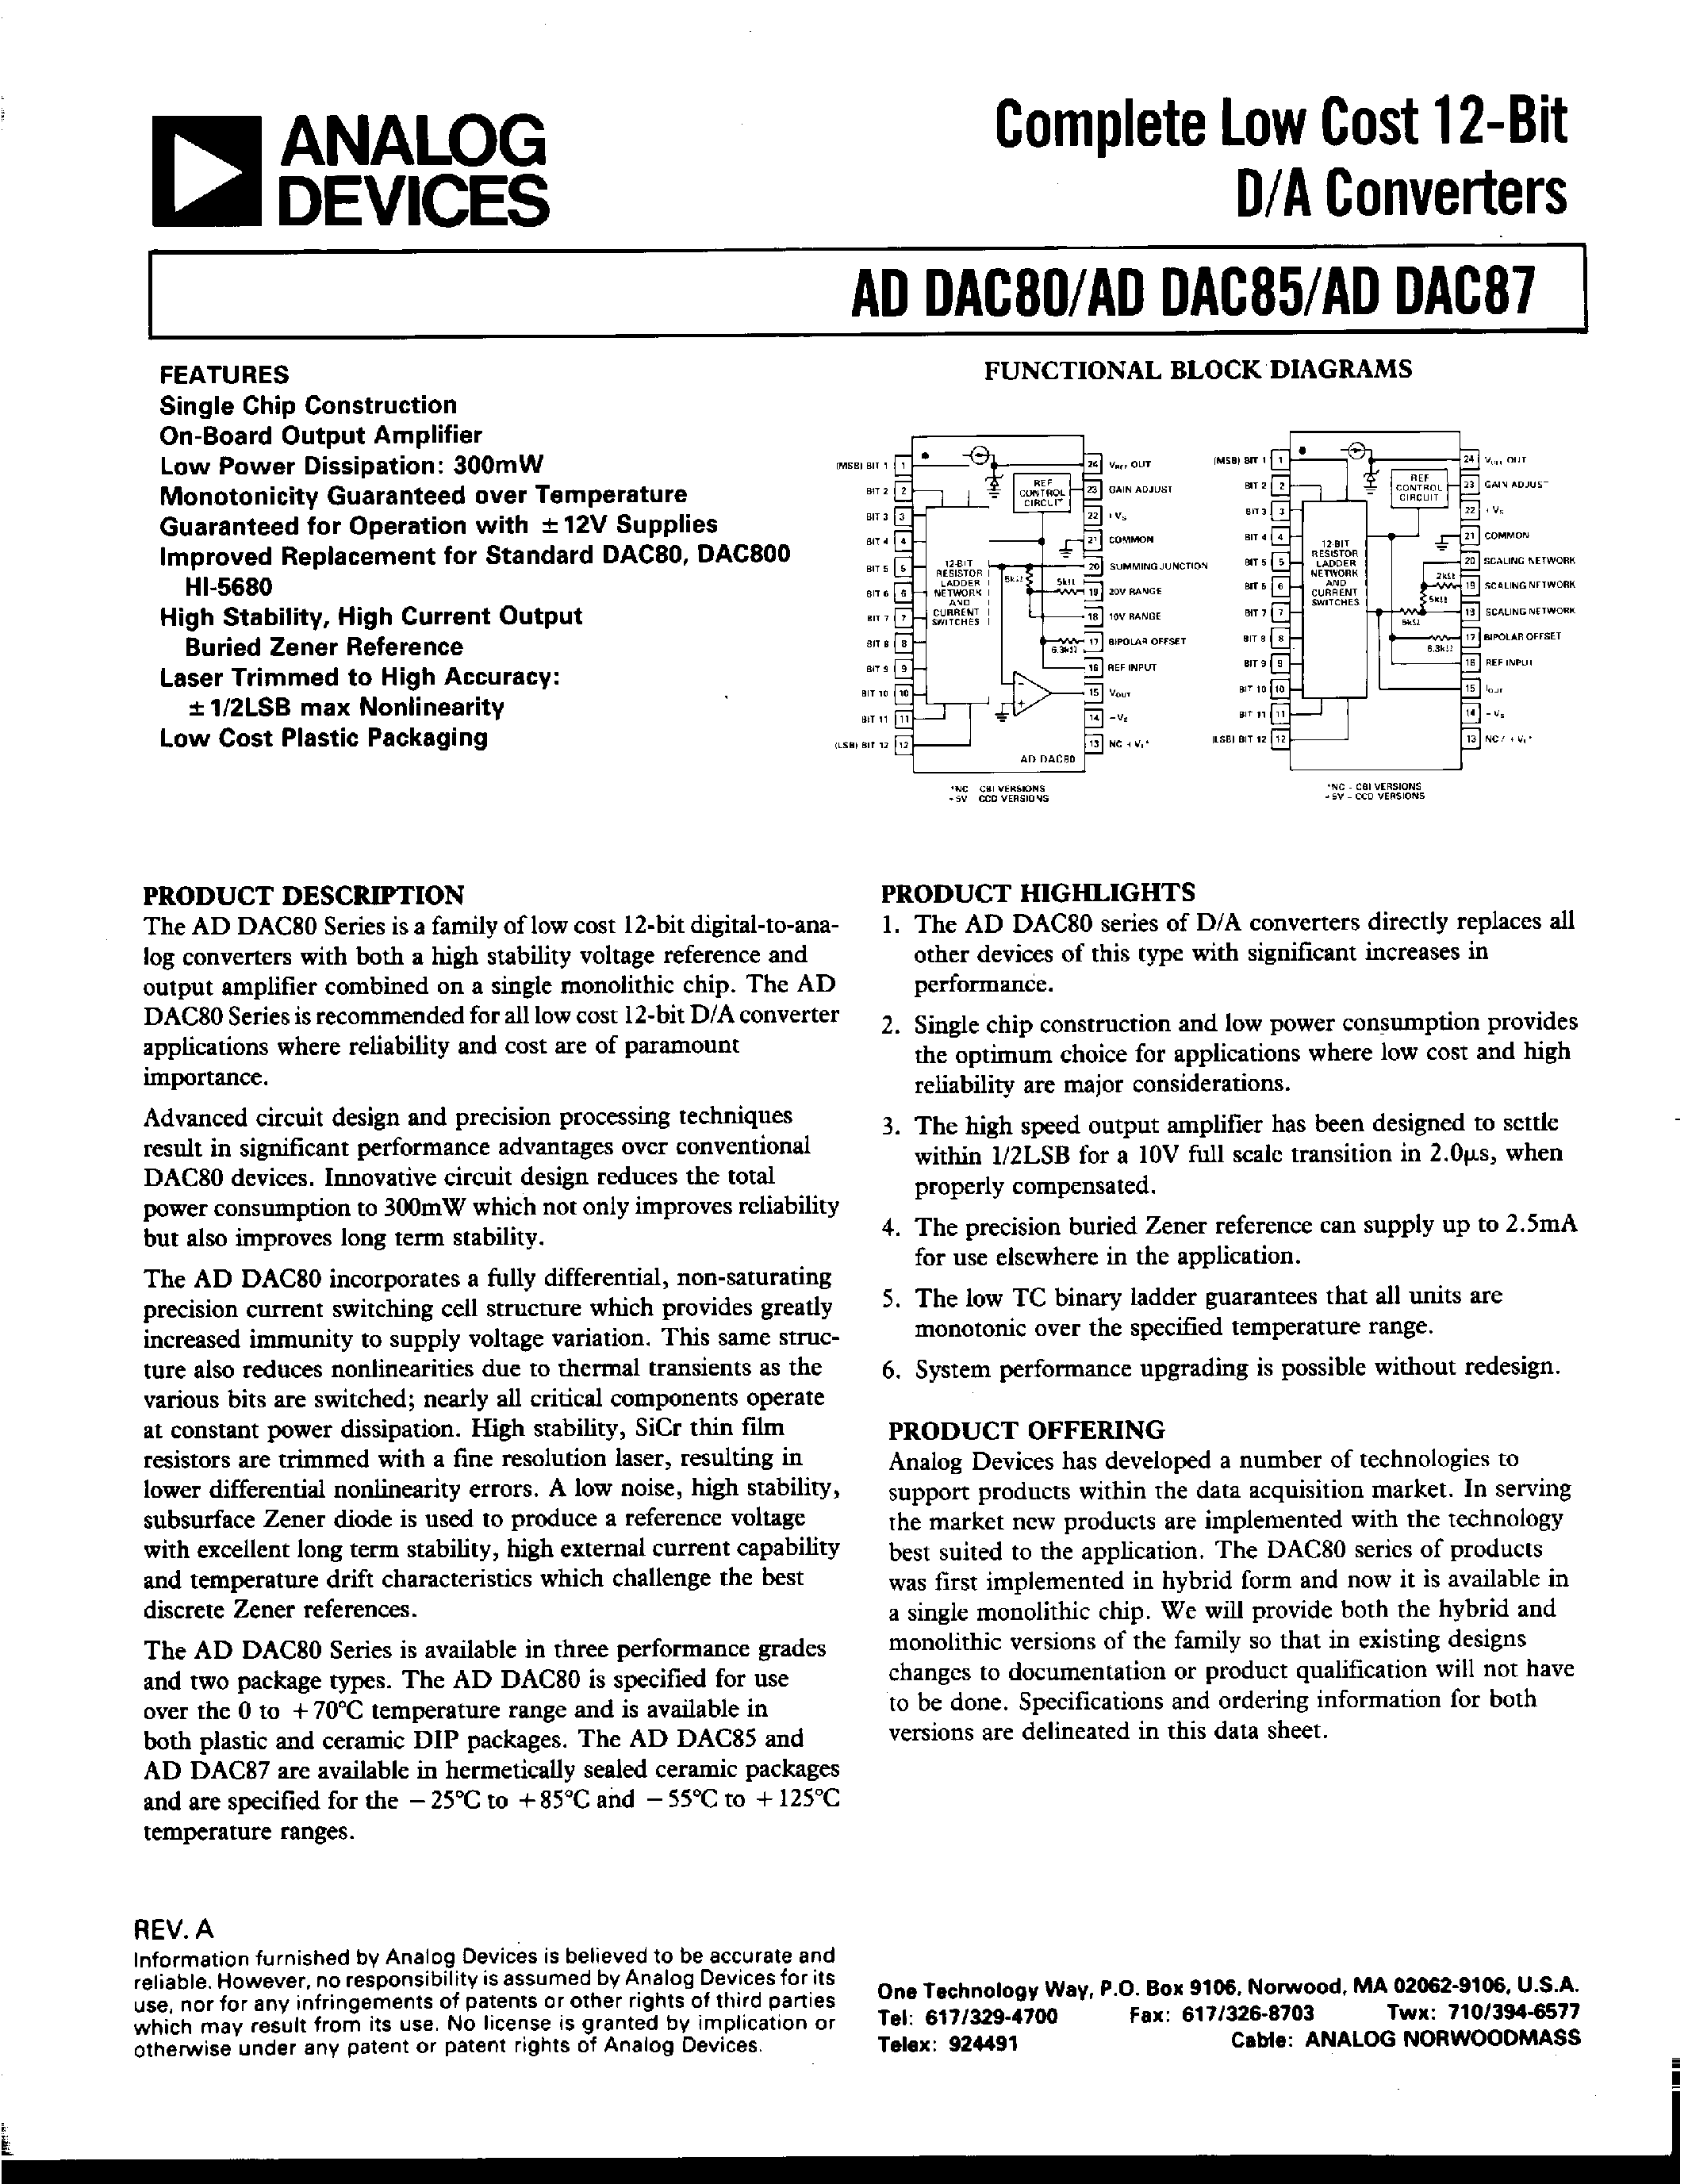 Datasheet ADDAC85-CCD-V - COMPLETE LOW COST 12-BIT D/A CONVERTERS page 1